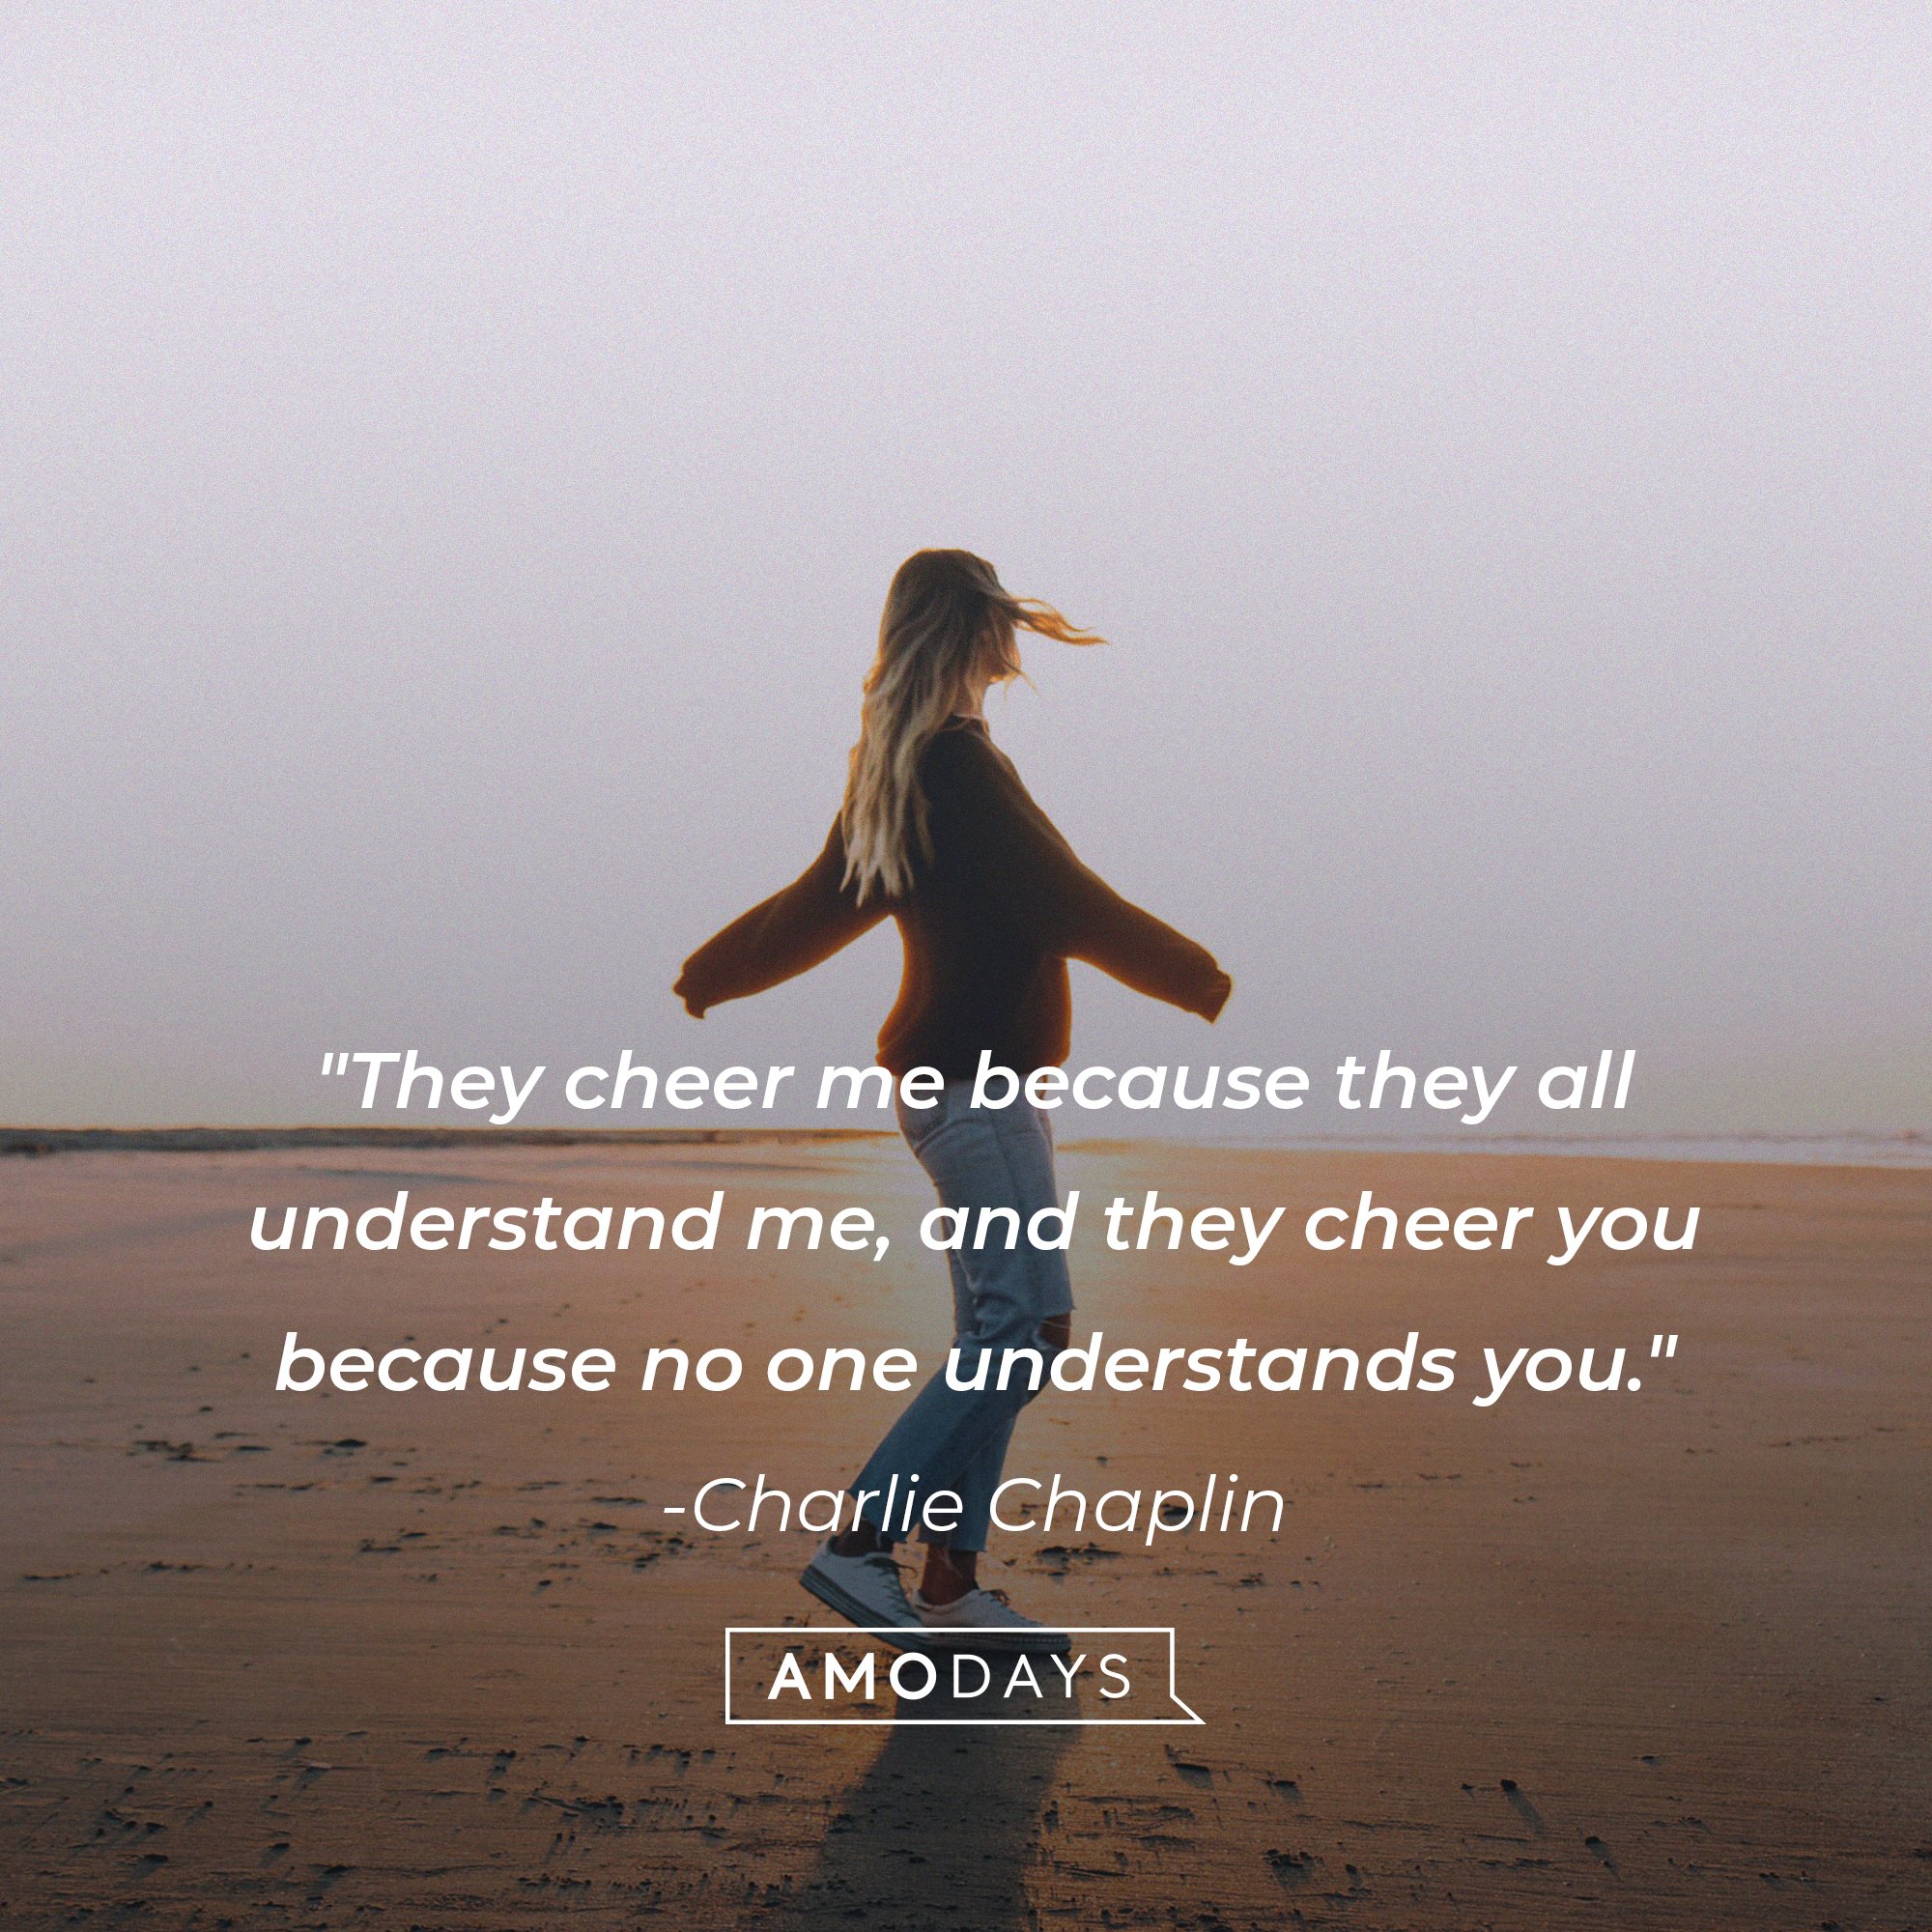 Charlie Chaplin’s quote: "They cheer me because they all understand me, and they cheer you because no one understands you." | Image: AmoDays  